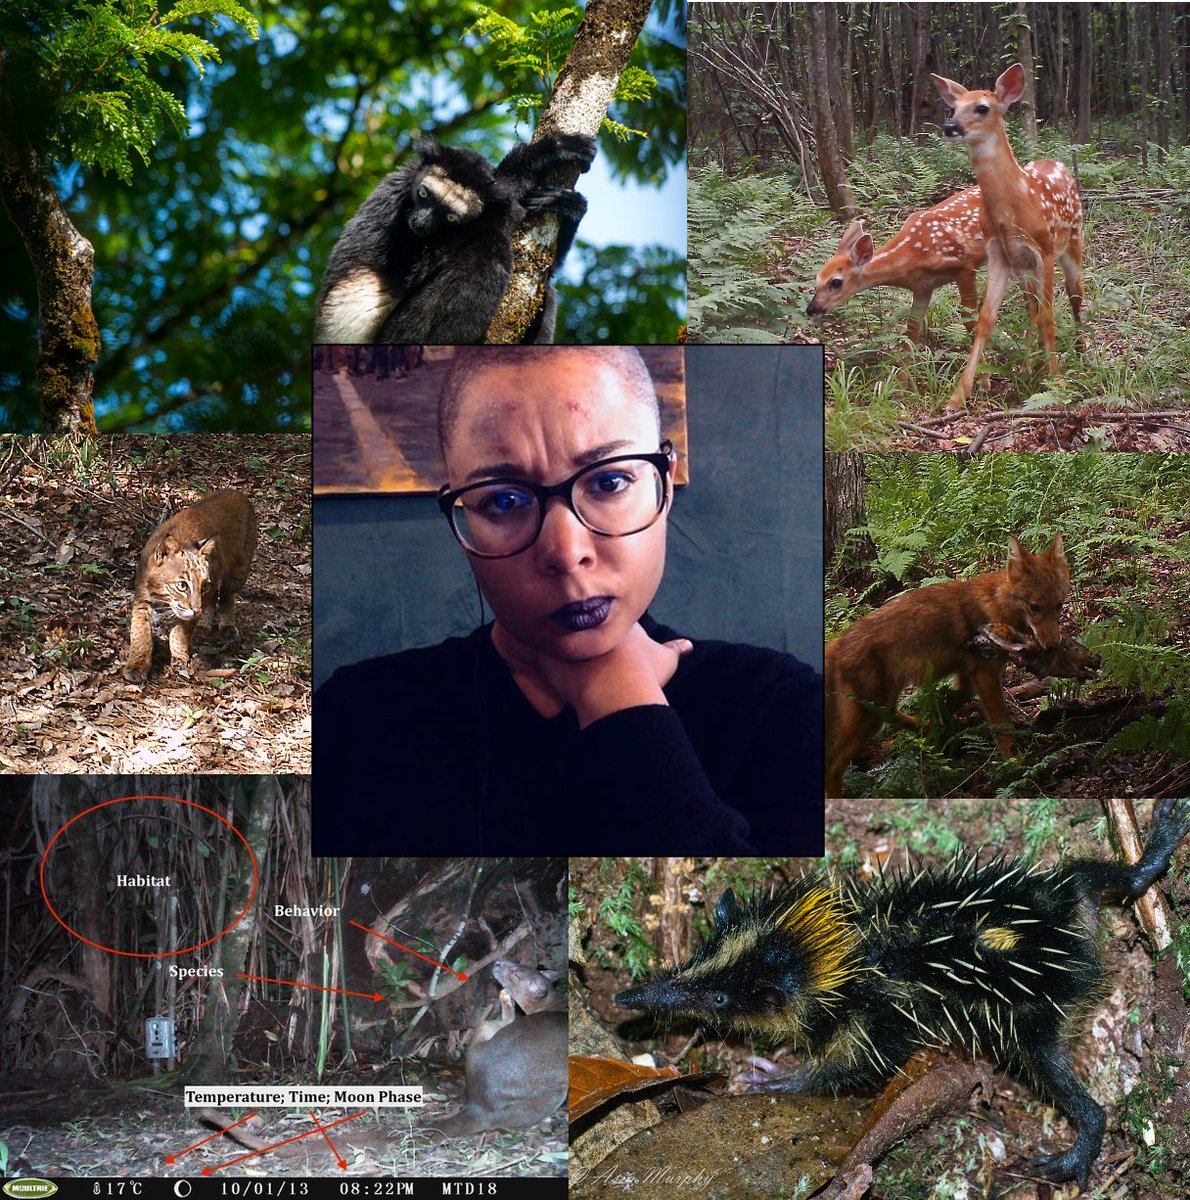 “My name's Asia Murphy  @am_anatiala, and I spy on wildlife. I put up trail cameras in forests and learn about how many animals are in an area, what kinds of habitats they like, how they coexist with each other, and what times they're active...all from the pictures I get of them!”